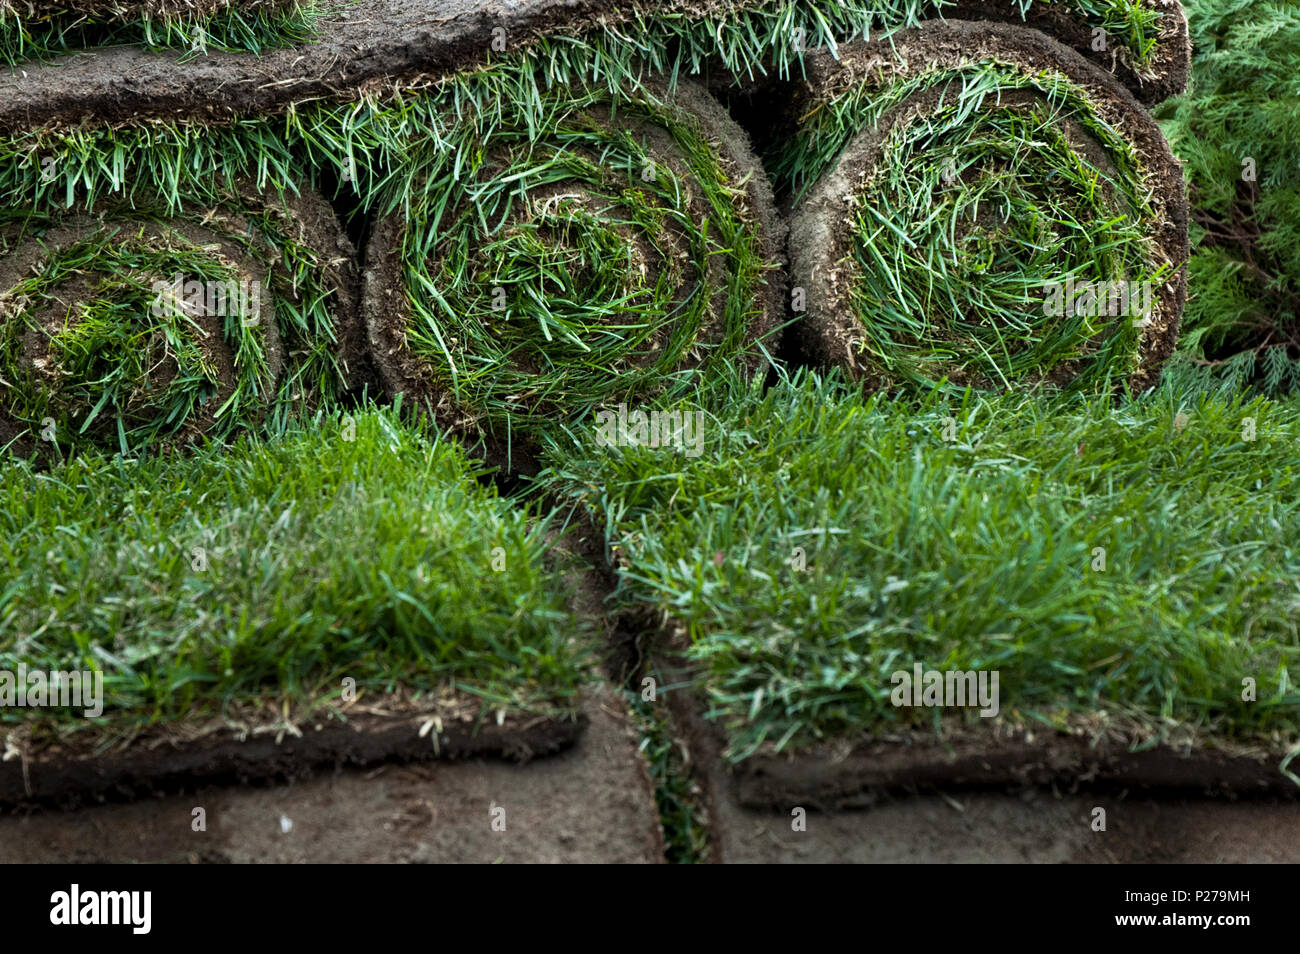 Sod Rolls displayed for an Instant Green Grass Lawn Stock Photo